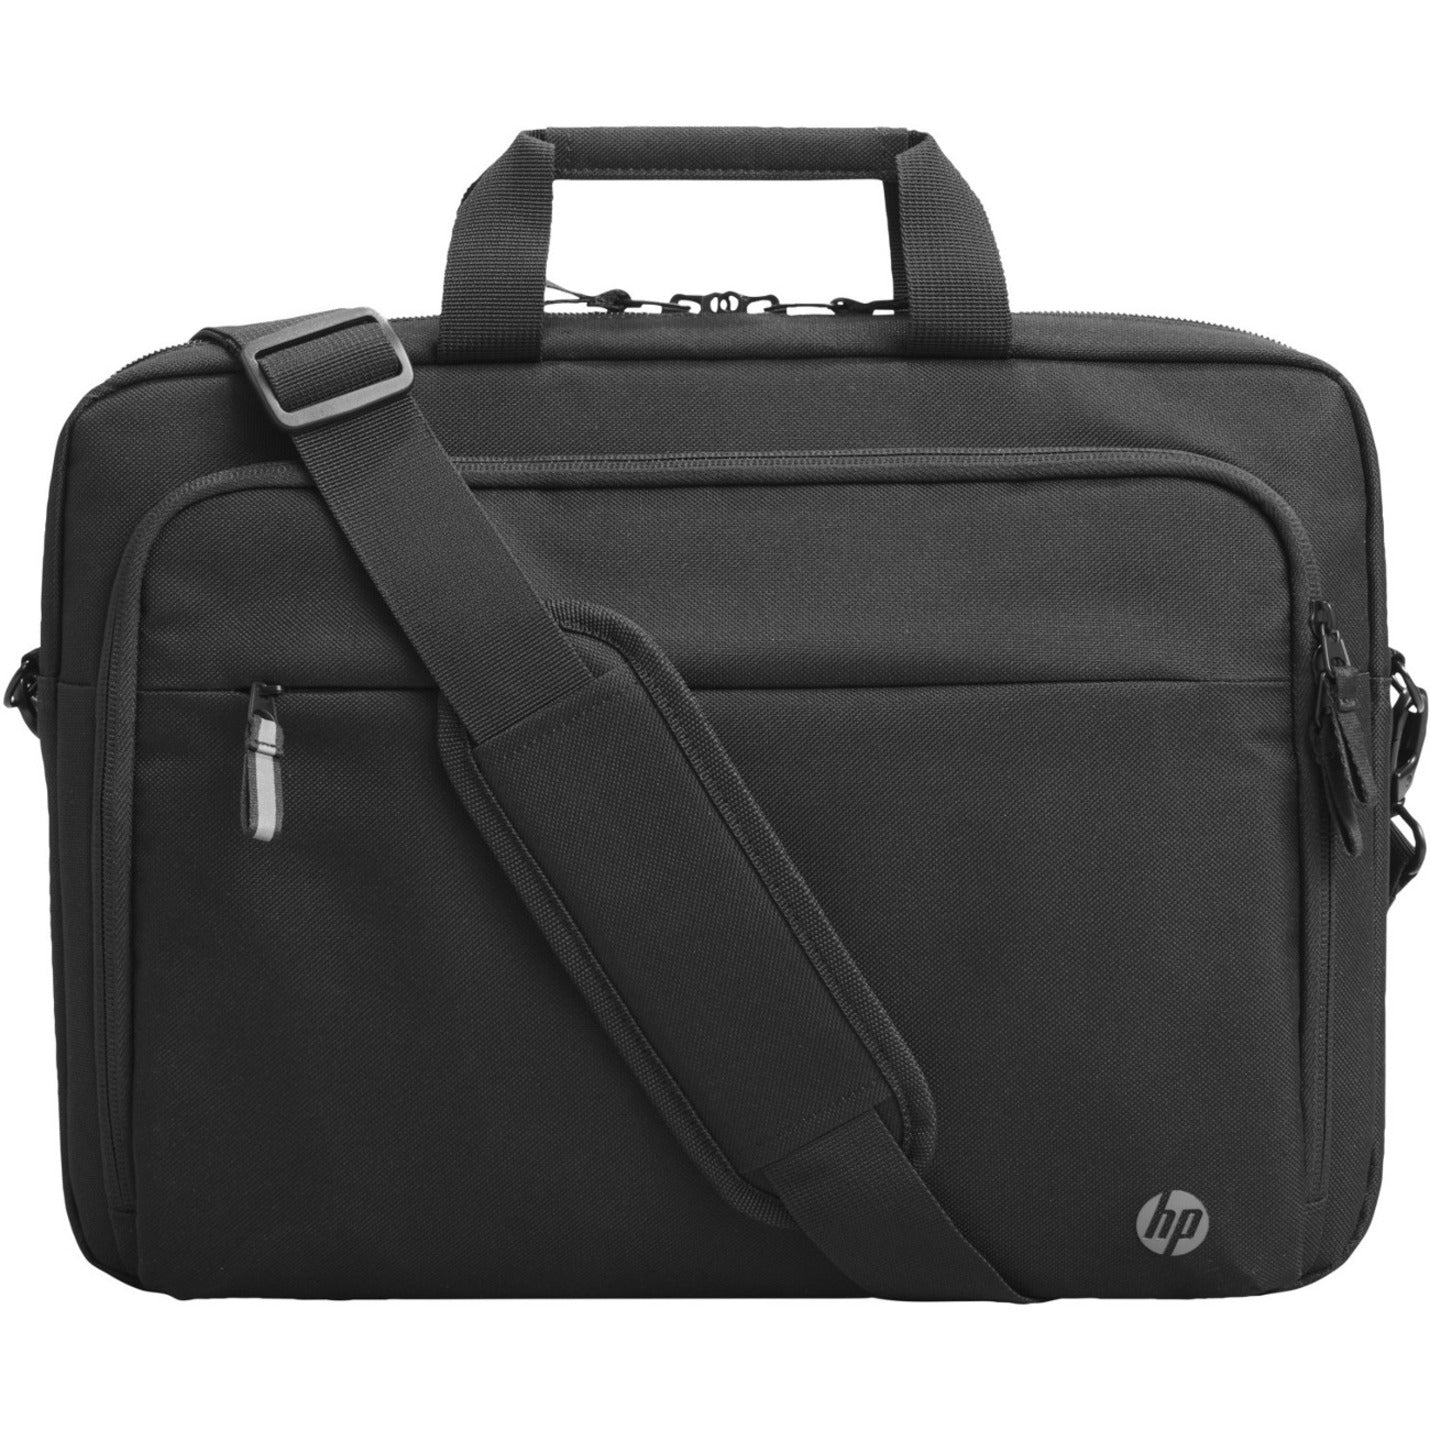 HP 3E5F8UT Renew Business 15.6-inch Laptop Bag, Sleeve, Water Resistant, Trolley Strap, Shoulder Strap, Handle